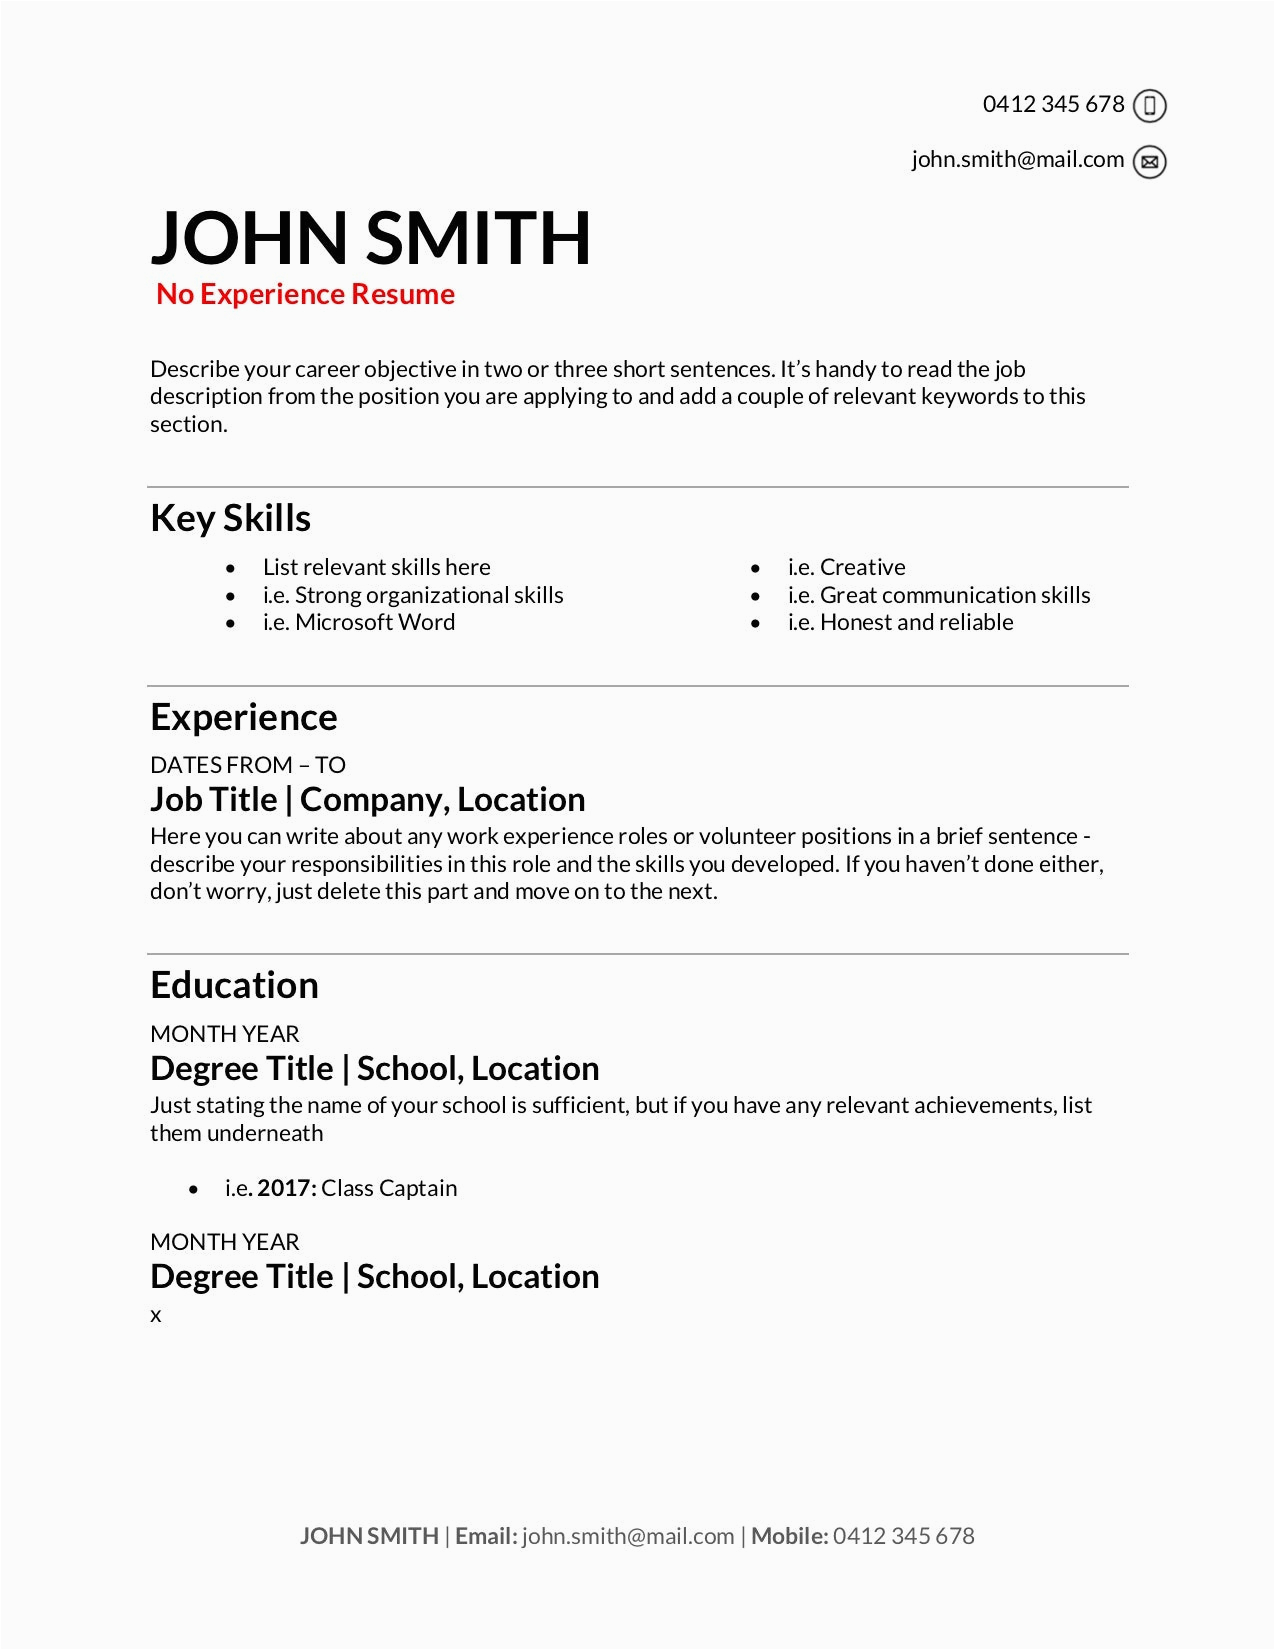 Sample Resume for Aged Care Worker with No Experience Australia Free Resume Templates [download] How to Write A Resume In